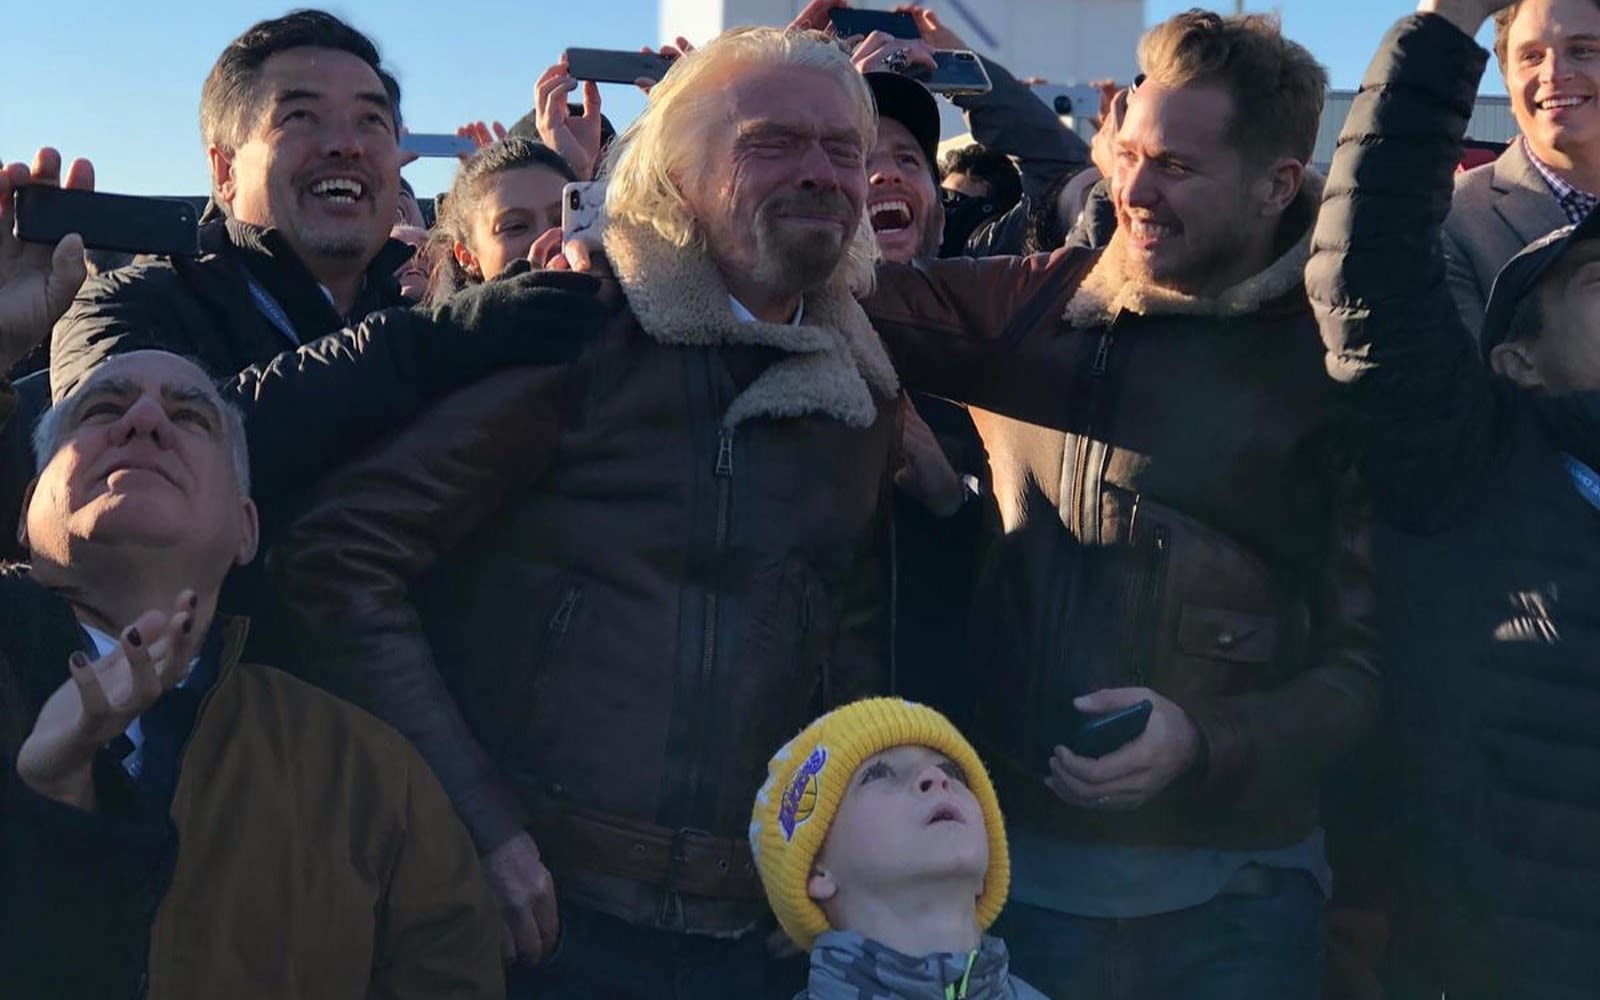 Richard Branson and Sam Branson celebrate with a crowd during Virgin Galactic's first spaceflight